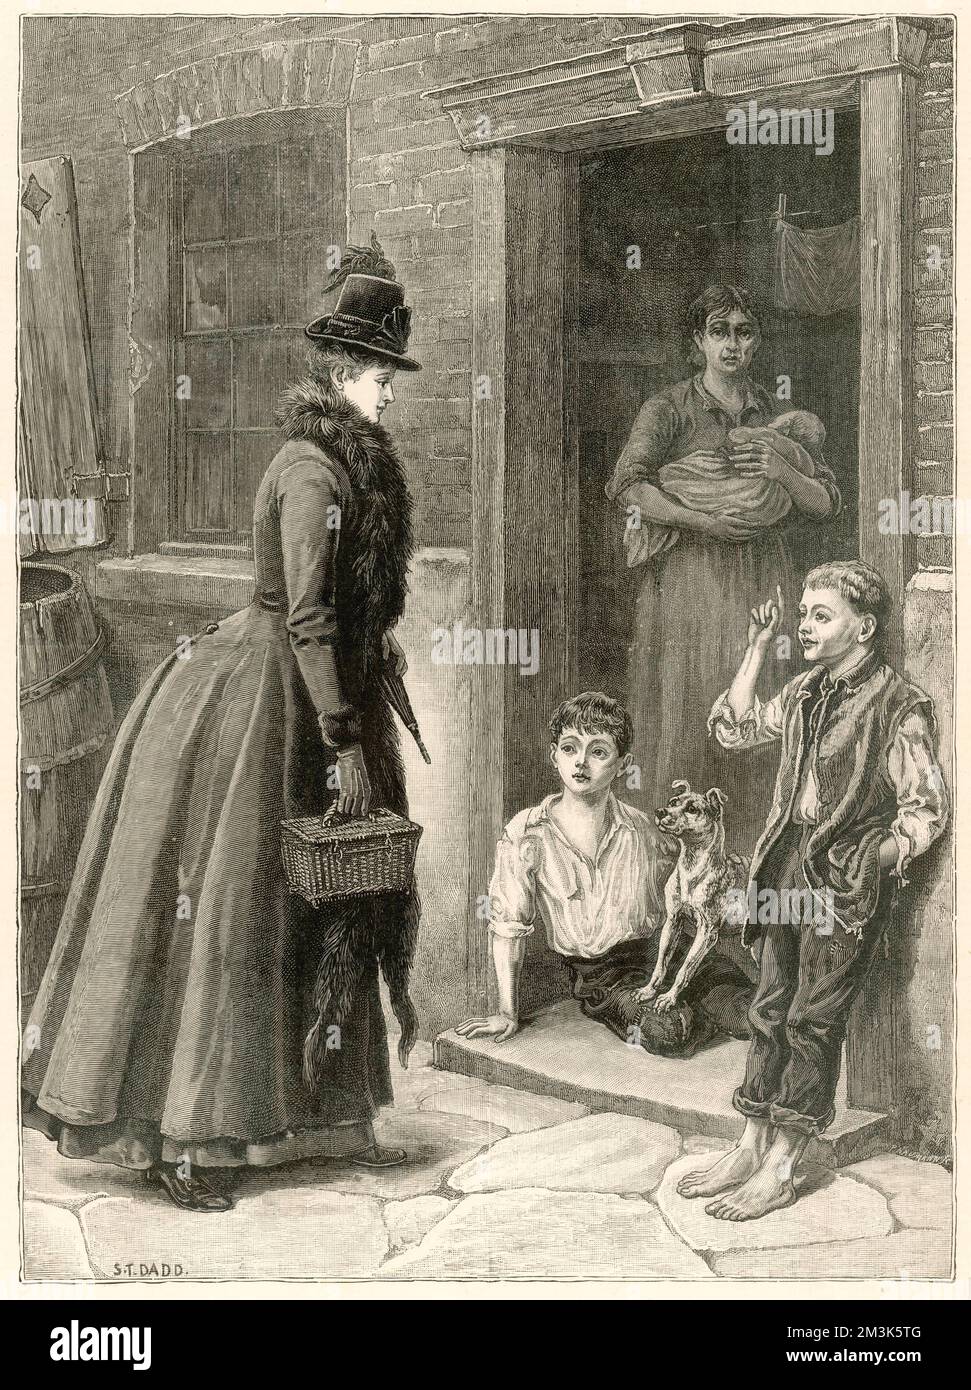 A welcome visitor to a poor home is greeted by a young barefoot boy, his brother and their mother holding a baby. This lady's arrival may be the only relief this family has had in a while. They all, including the dog, look to her with expectation.     Date: 1888 Stock Photo